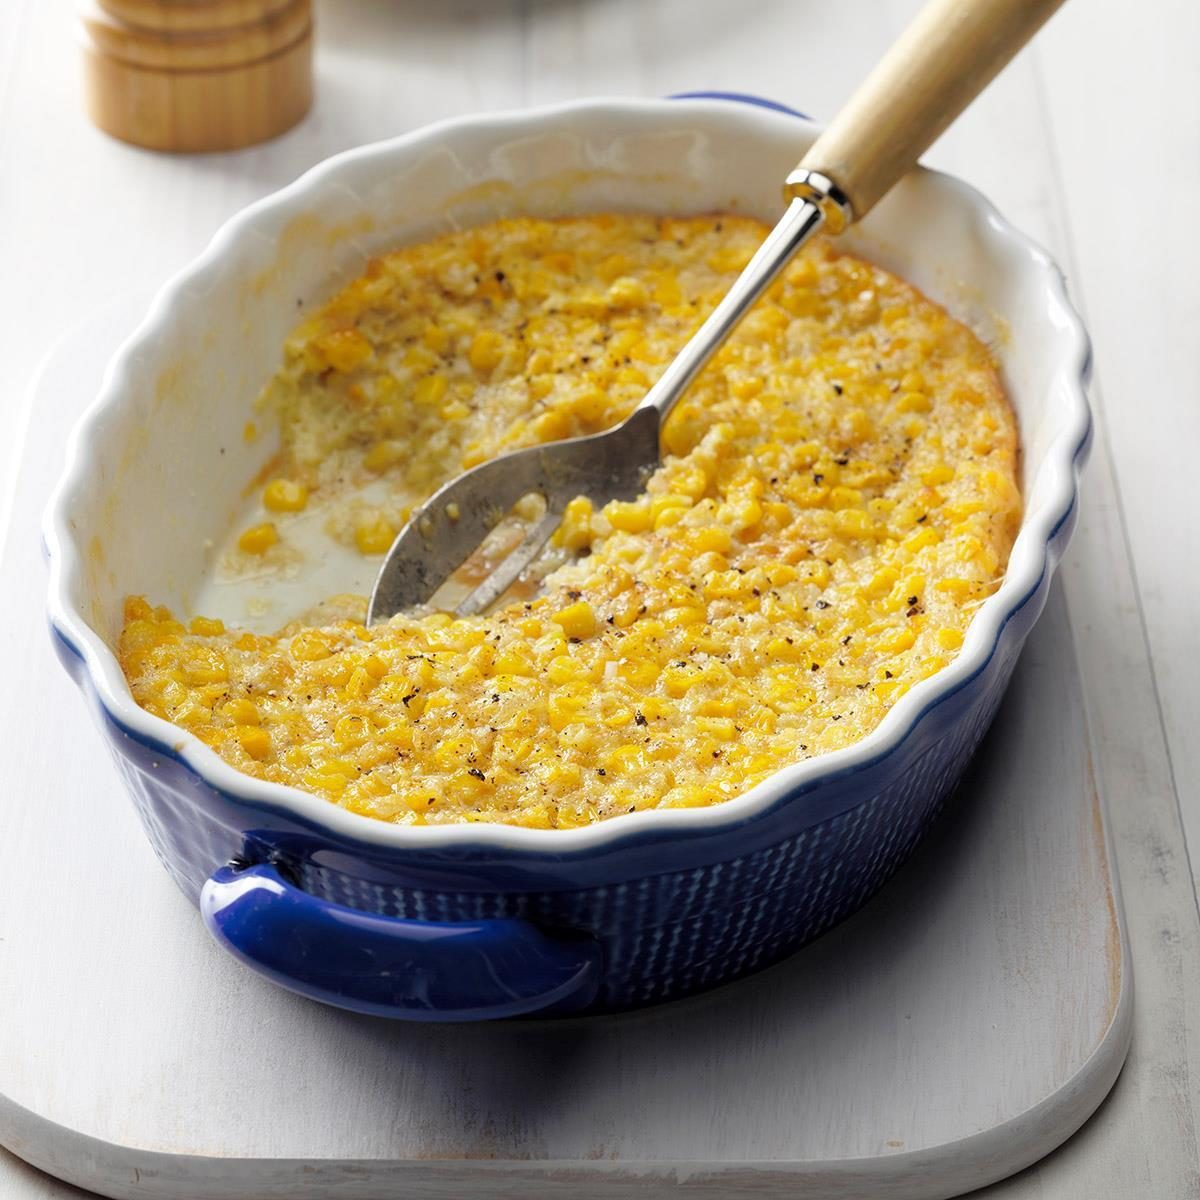 Baked Corn Pudding Recipe: How to Make It | Taste of Home